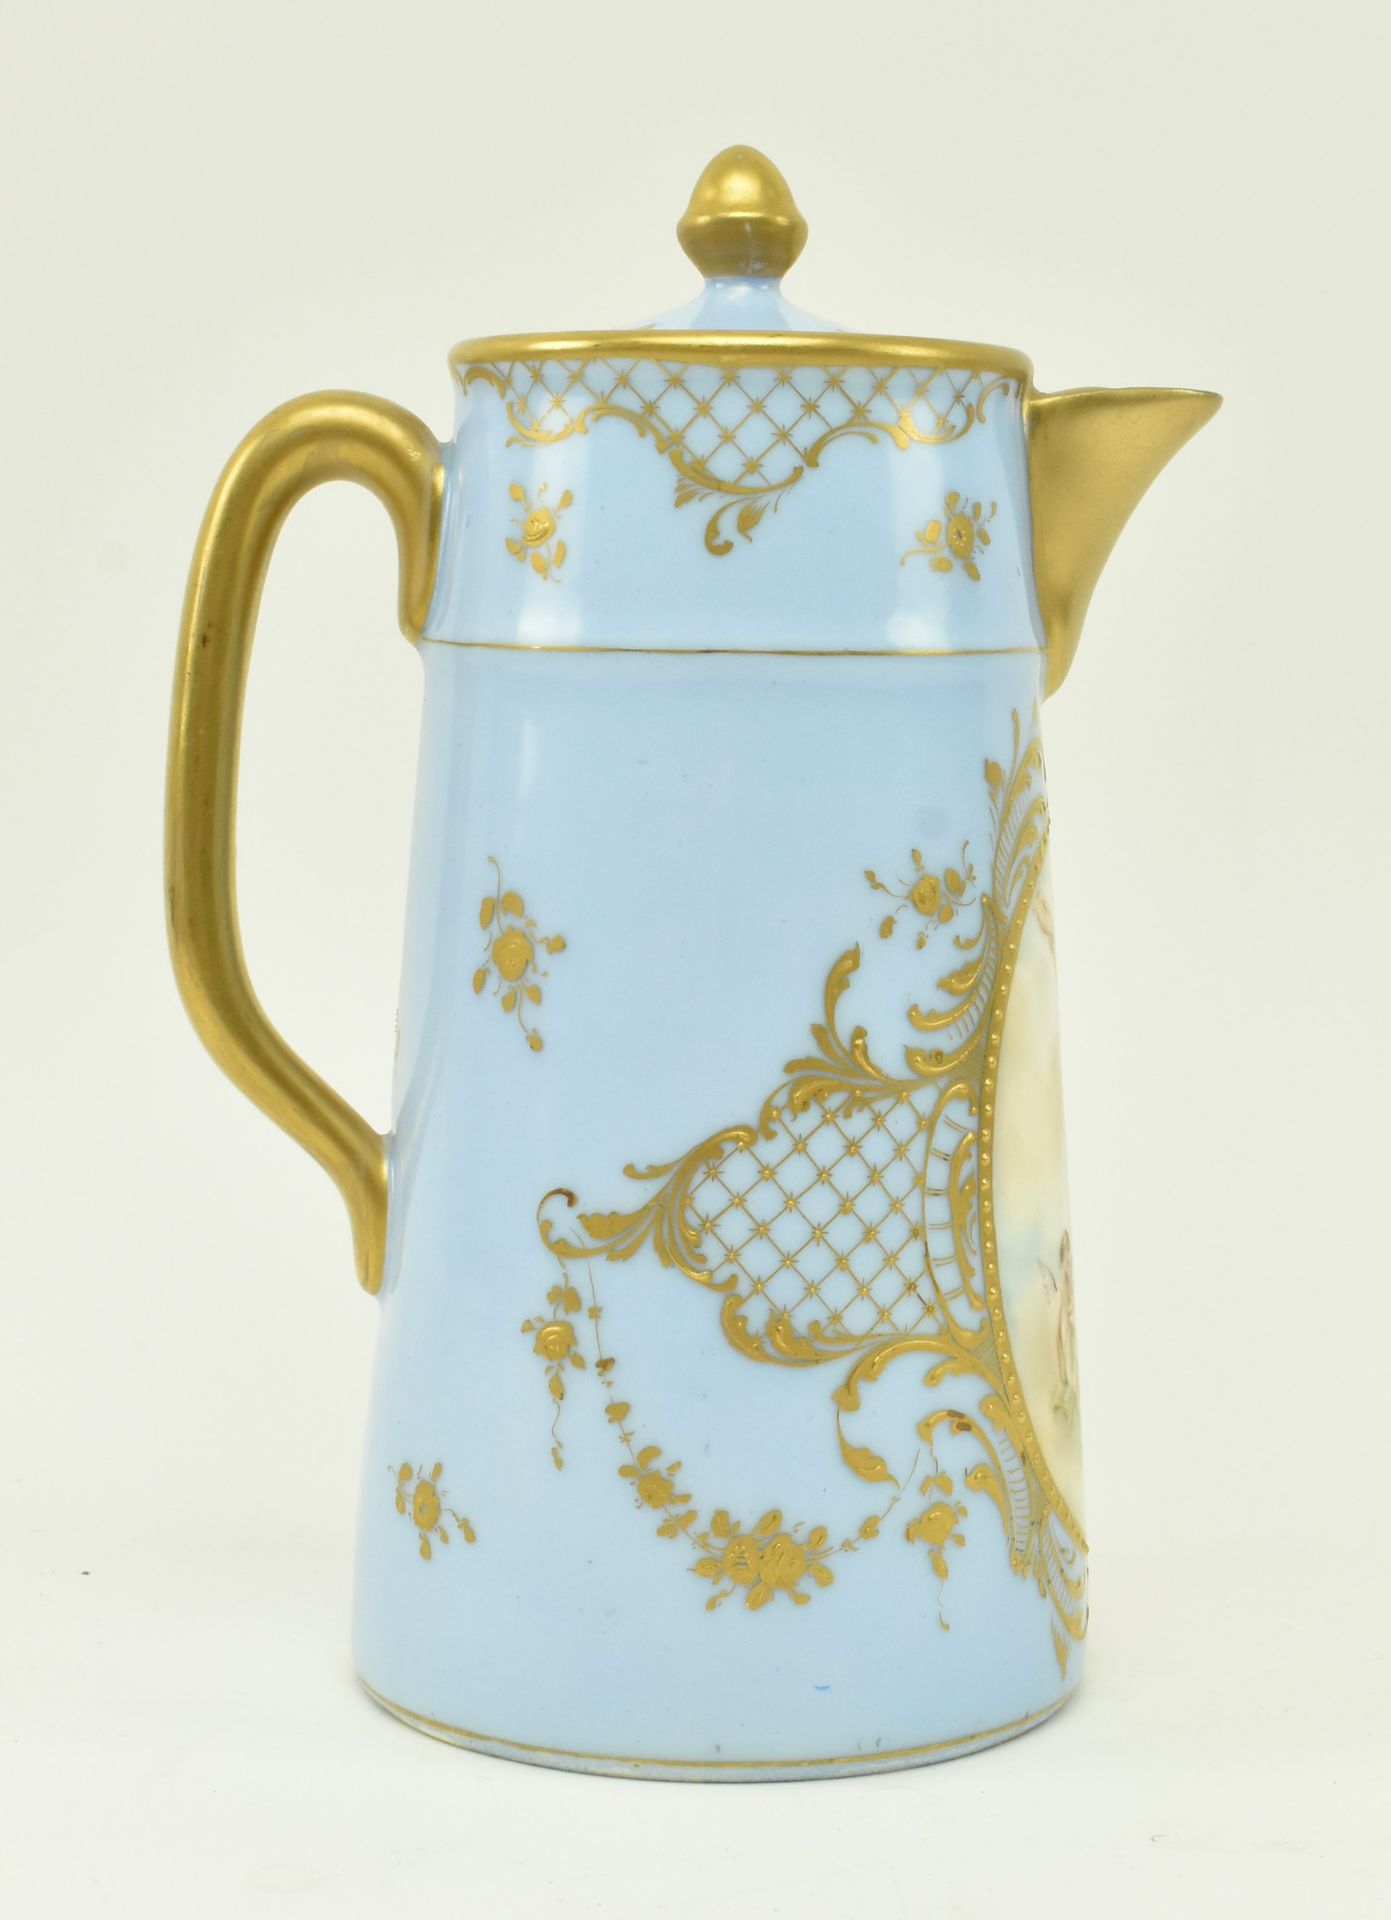 DRESDEN - EARLY 20TH CENTURY PORCELAIN CHOCOLATE POT - Image 3 of 9